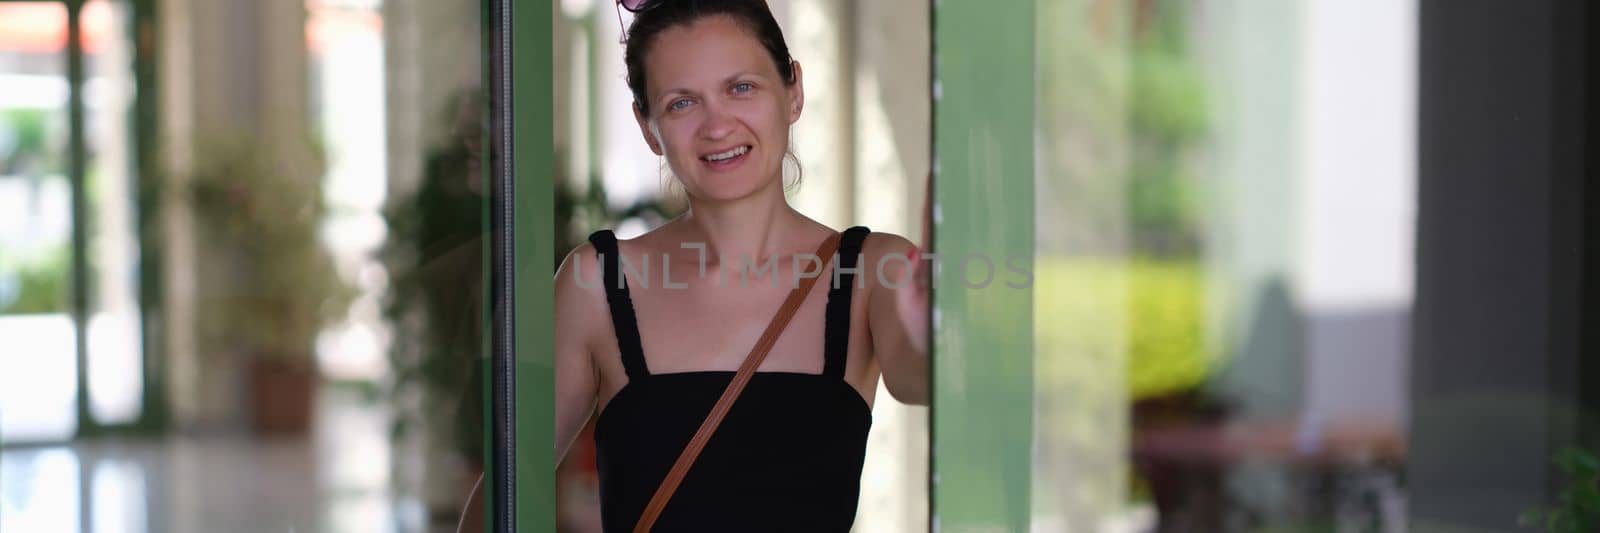 Young smiling woman opens a glass door. Meeting guests concept